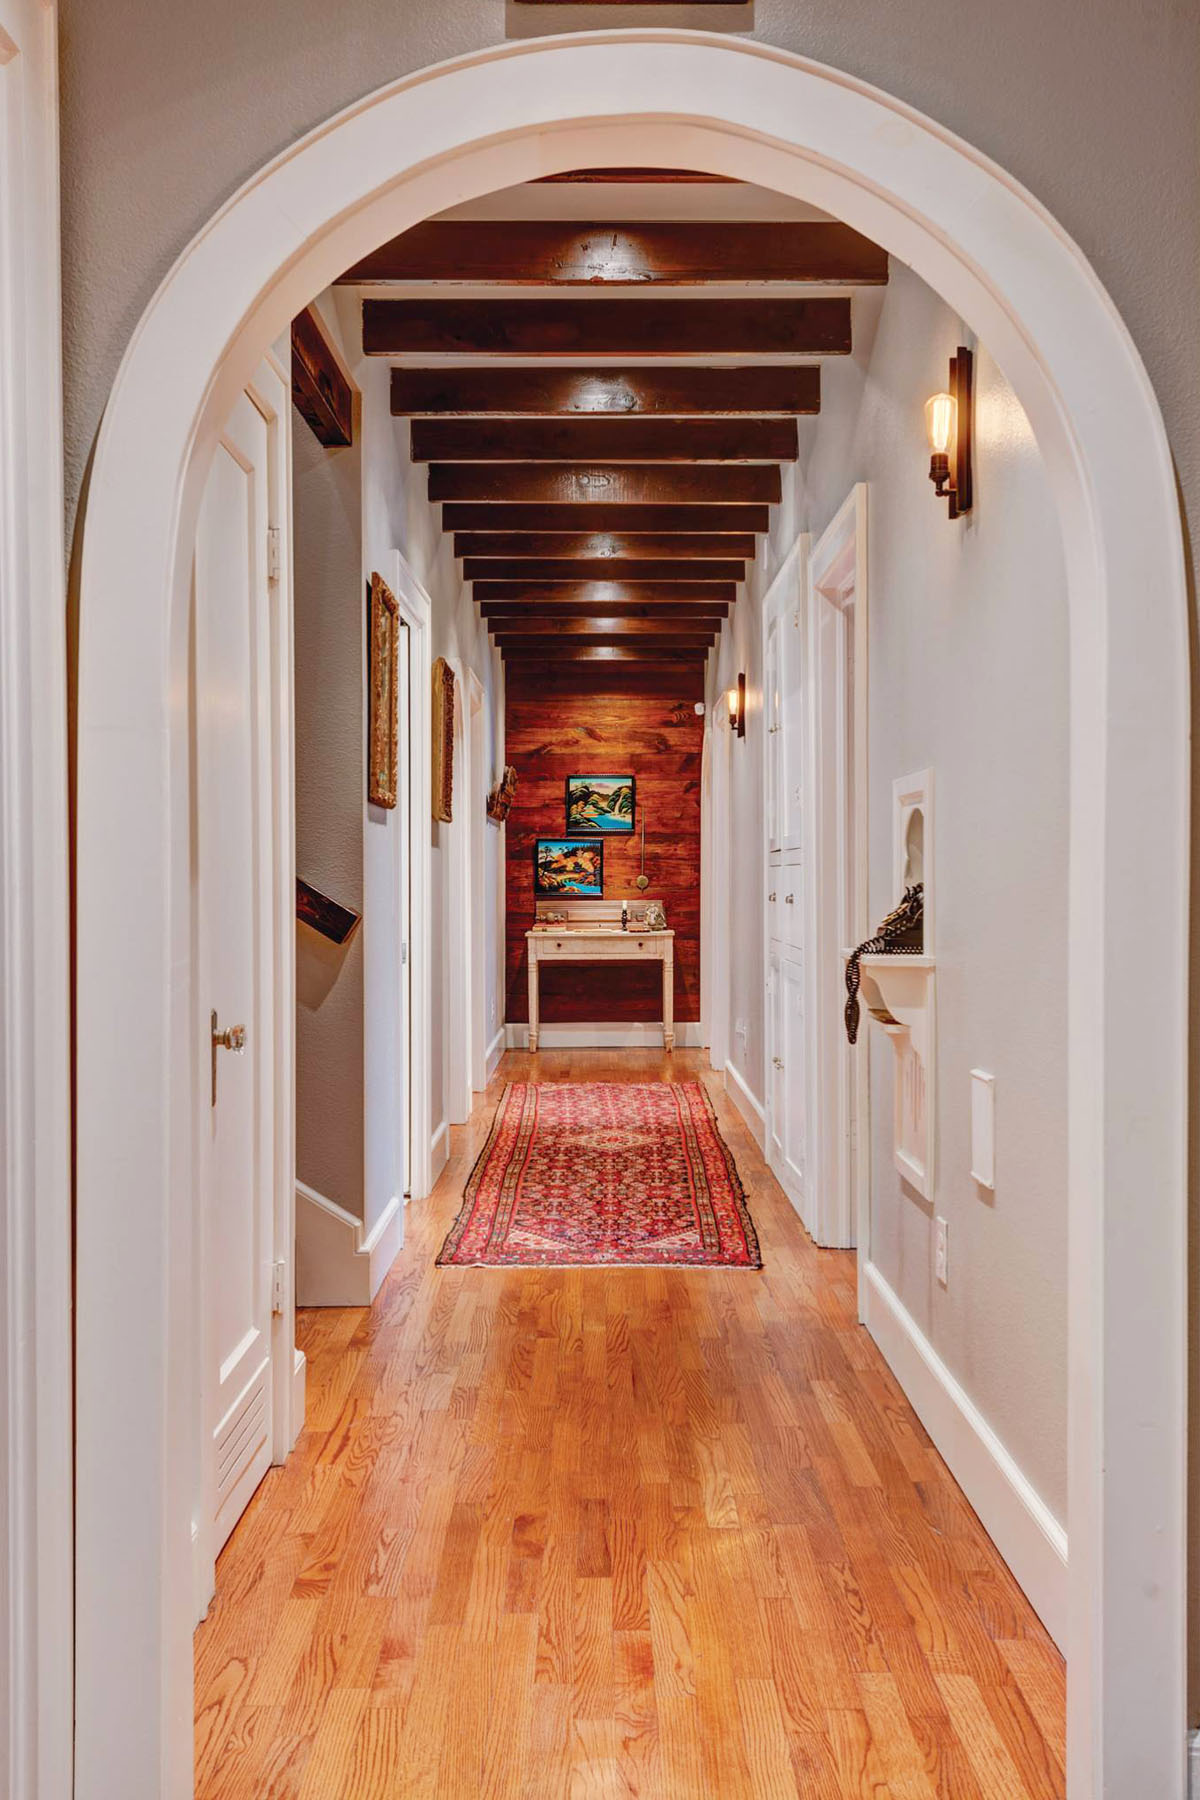 Hallway with Arched Door Opening and Wood Ceiling Beams